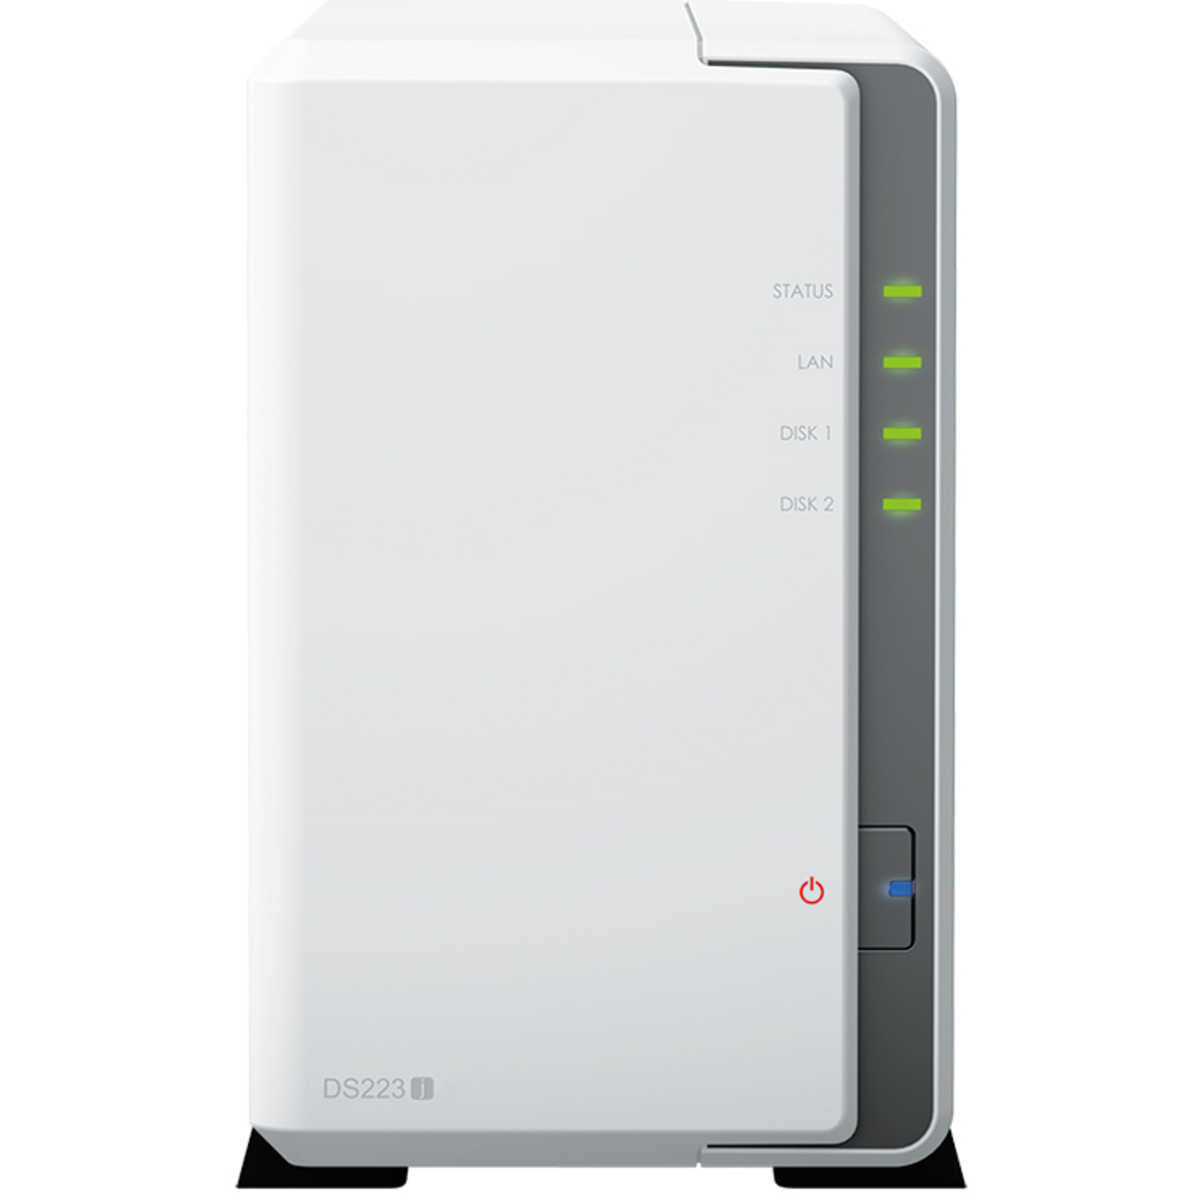 buy Synology DiskStation DS223j 8tb Desktop NAS - Network Attached Storage Device 2x4000gb Seagate BarraCuda ST4000DM004 3.5 7200rpm SATA 6Gb/s HDD CONSUMER Class Drives Installed - Burn-In Tested - nas headquarters buy network attached storage server device das new raid-5 free shipping usa spring sale DiskStation DS223j